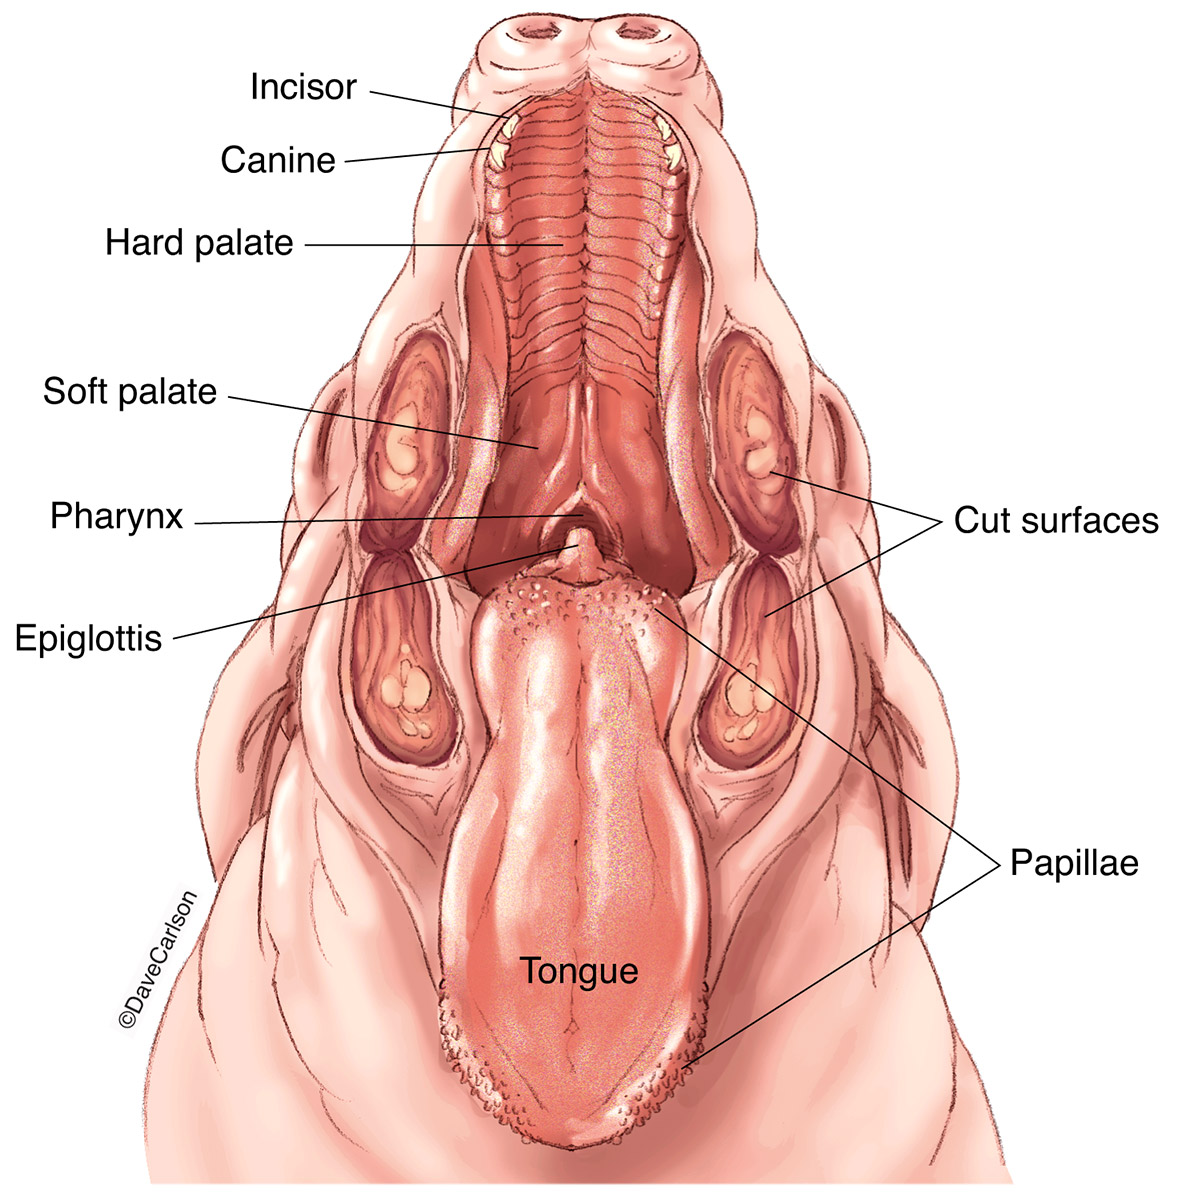 Illustration of the oral cavity structures of the fetal pig.